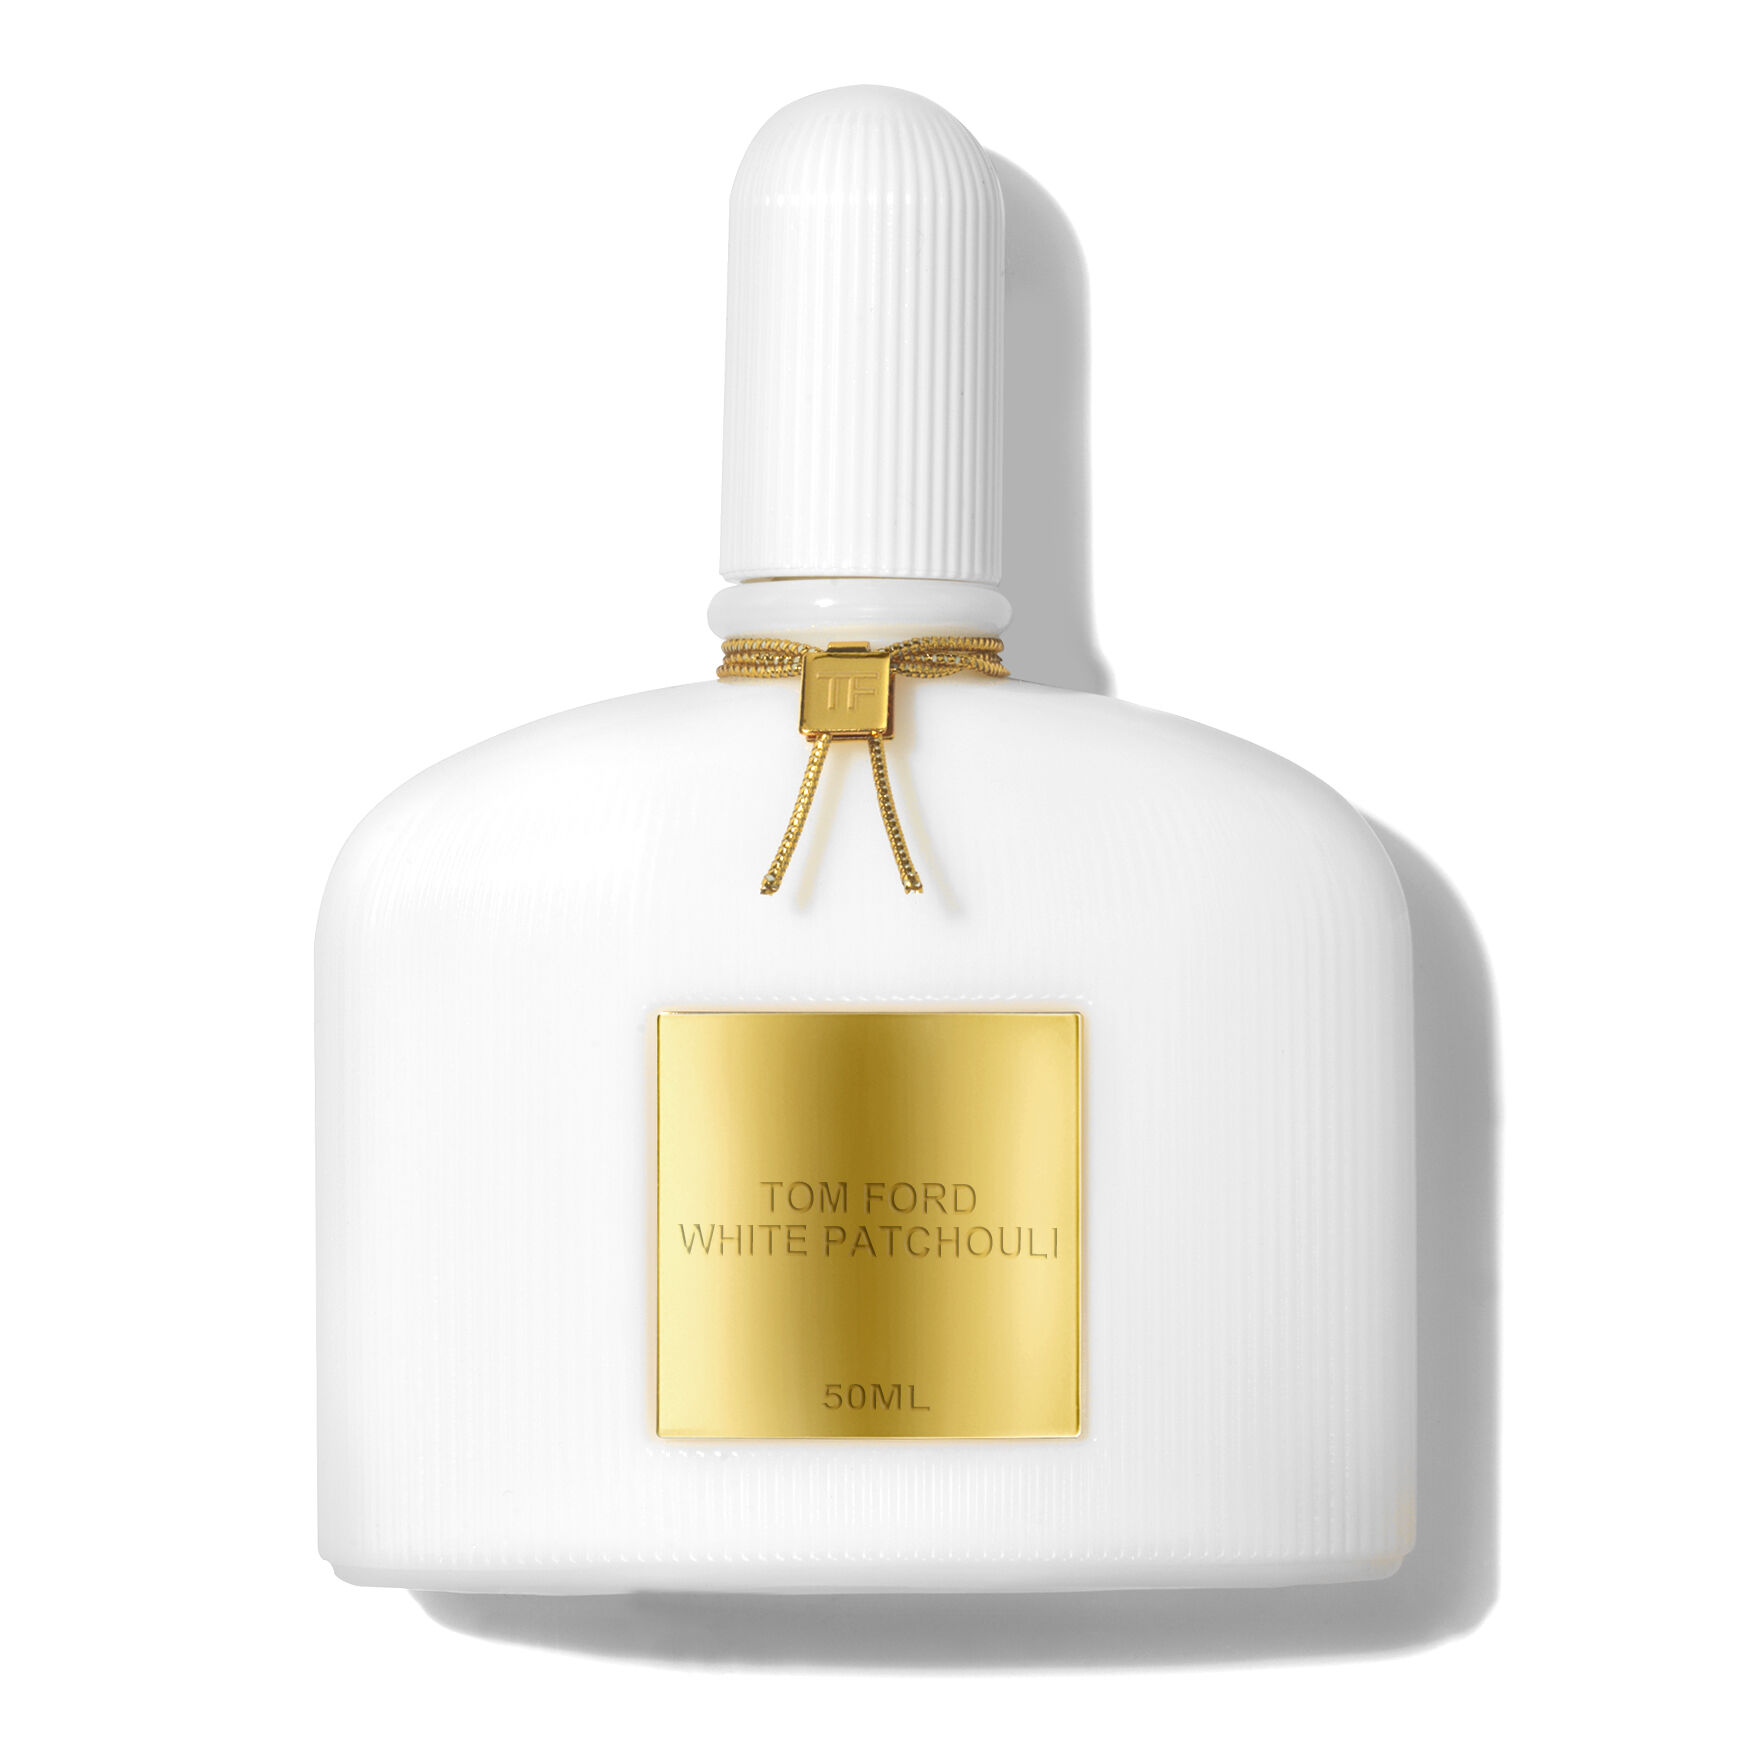 Tom Ford White Patchouli | Space NK